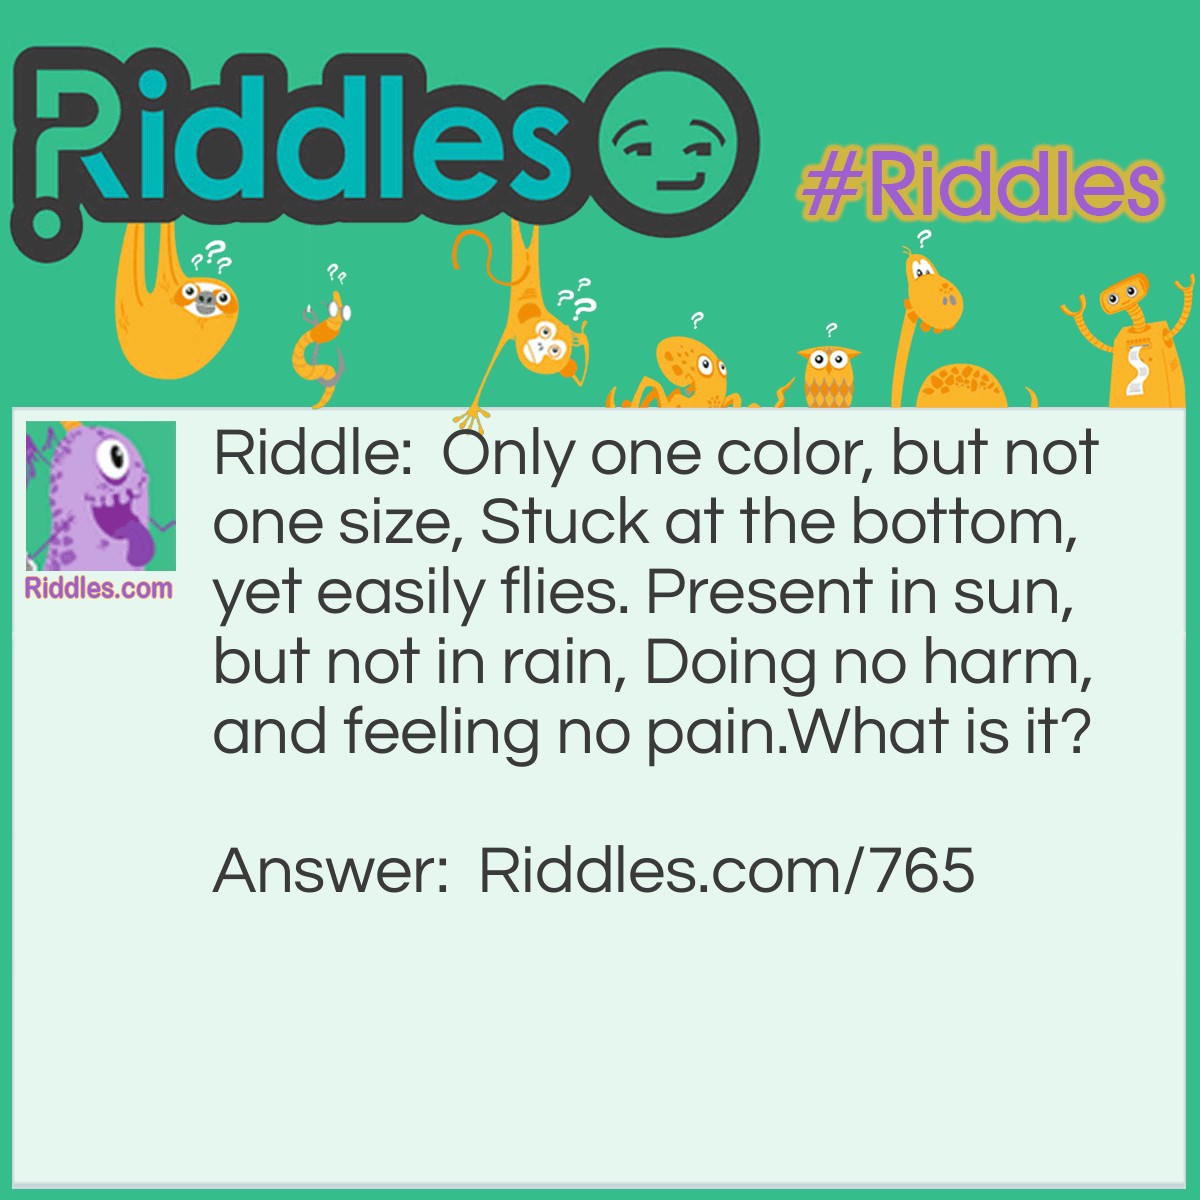 Riddle: Only one color, but not one size, Stuck at the bottom, yet easily flies. Present in sun, but not in rain, Doing no harm, and feeling no pain.
What is it? Answer: It is a shadow!